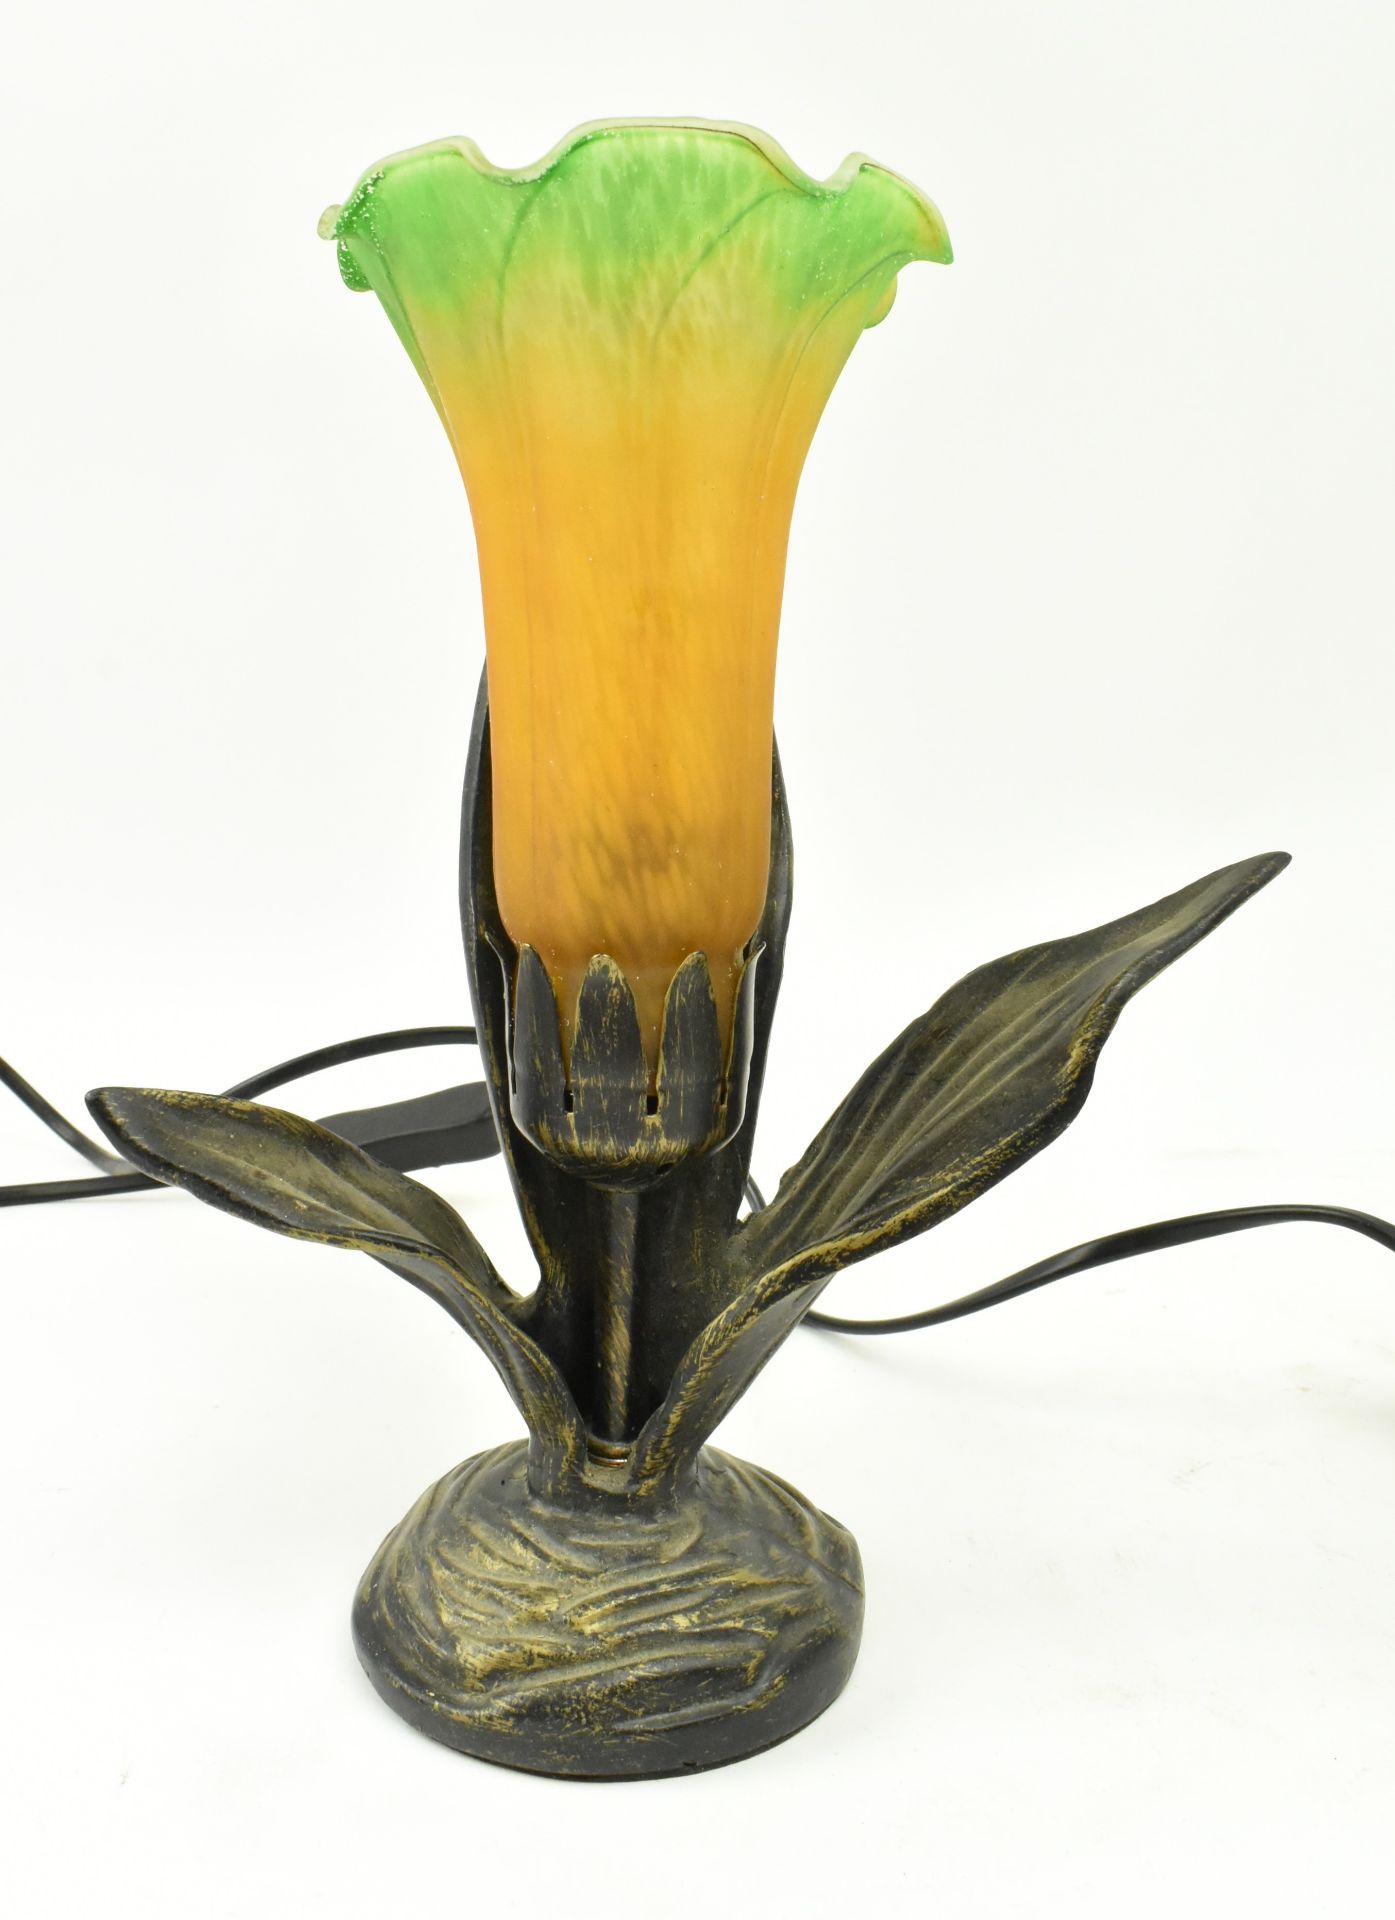 THREE ART DECO STYLE GLASS & METAL FLOWER DESK LAMPS - Image 3 of 5